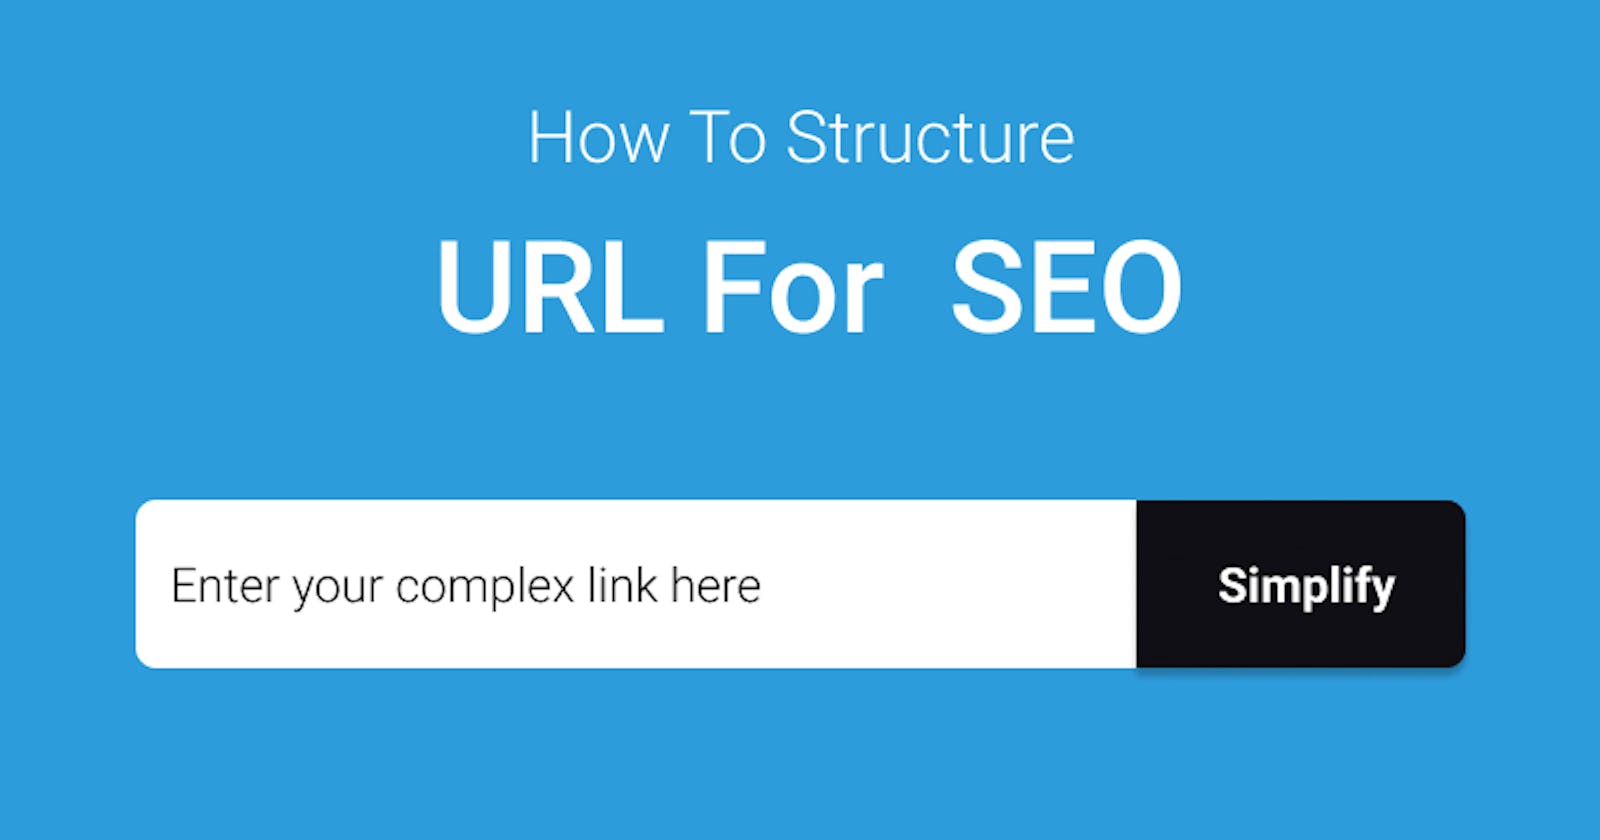 How To Structure URL For  SEO - 
Advice From Google I/O 2018